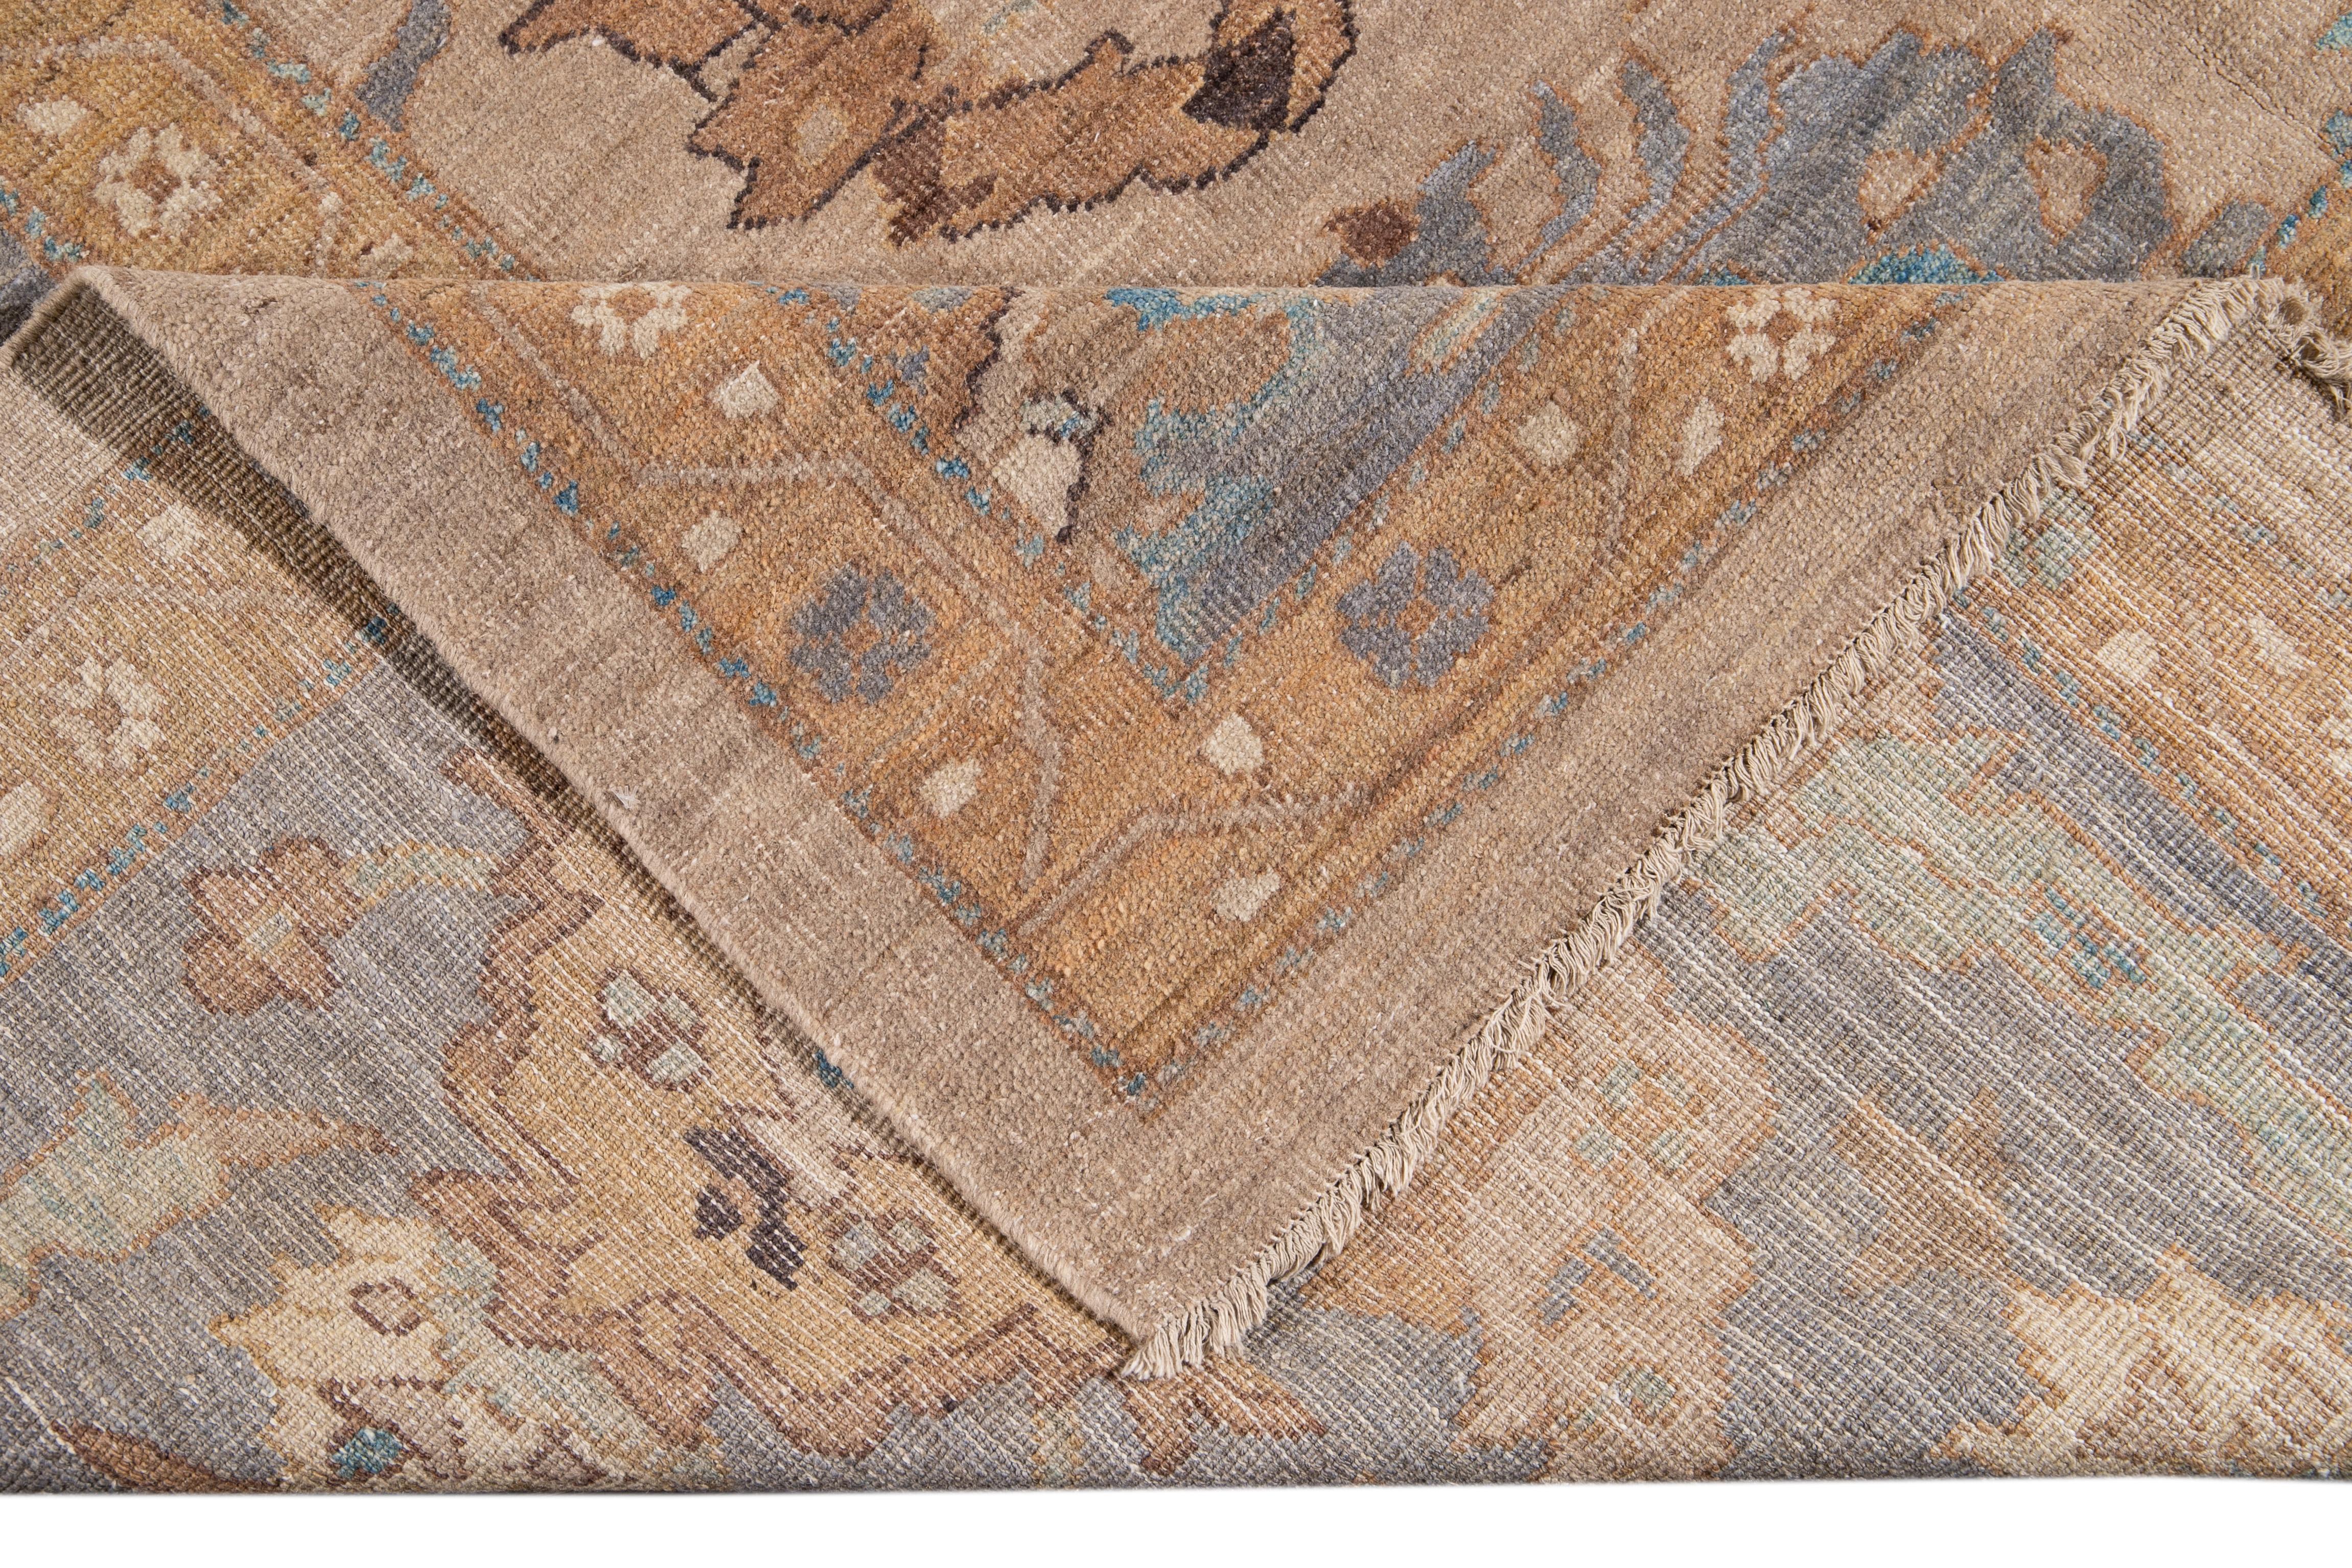 Beautiful modern Sultanabad hand-knotted wool rug with a tan field. This Sultanabad rug has gray accents in a gorgeous all-over Classic floral pattern design.

This rug measures: 13' x 19'3